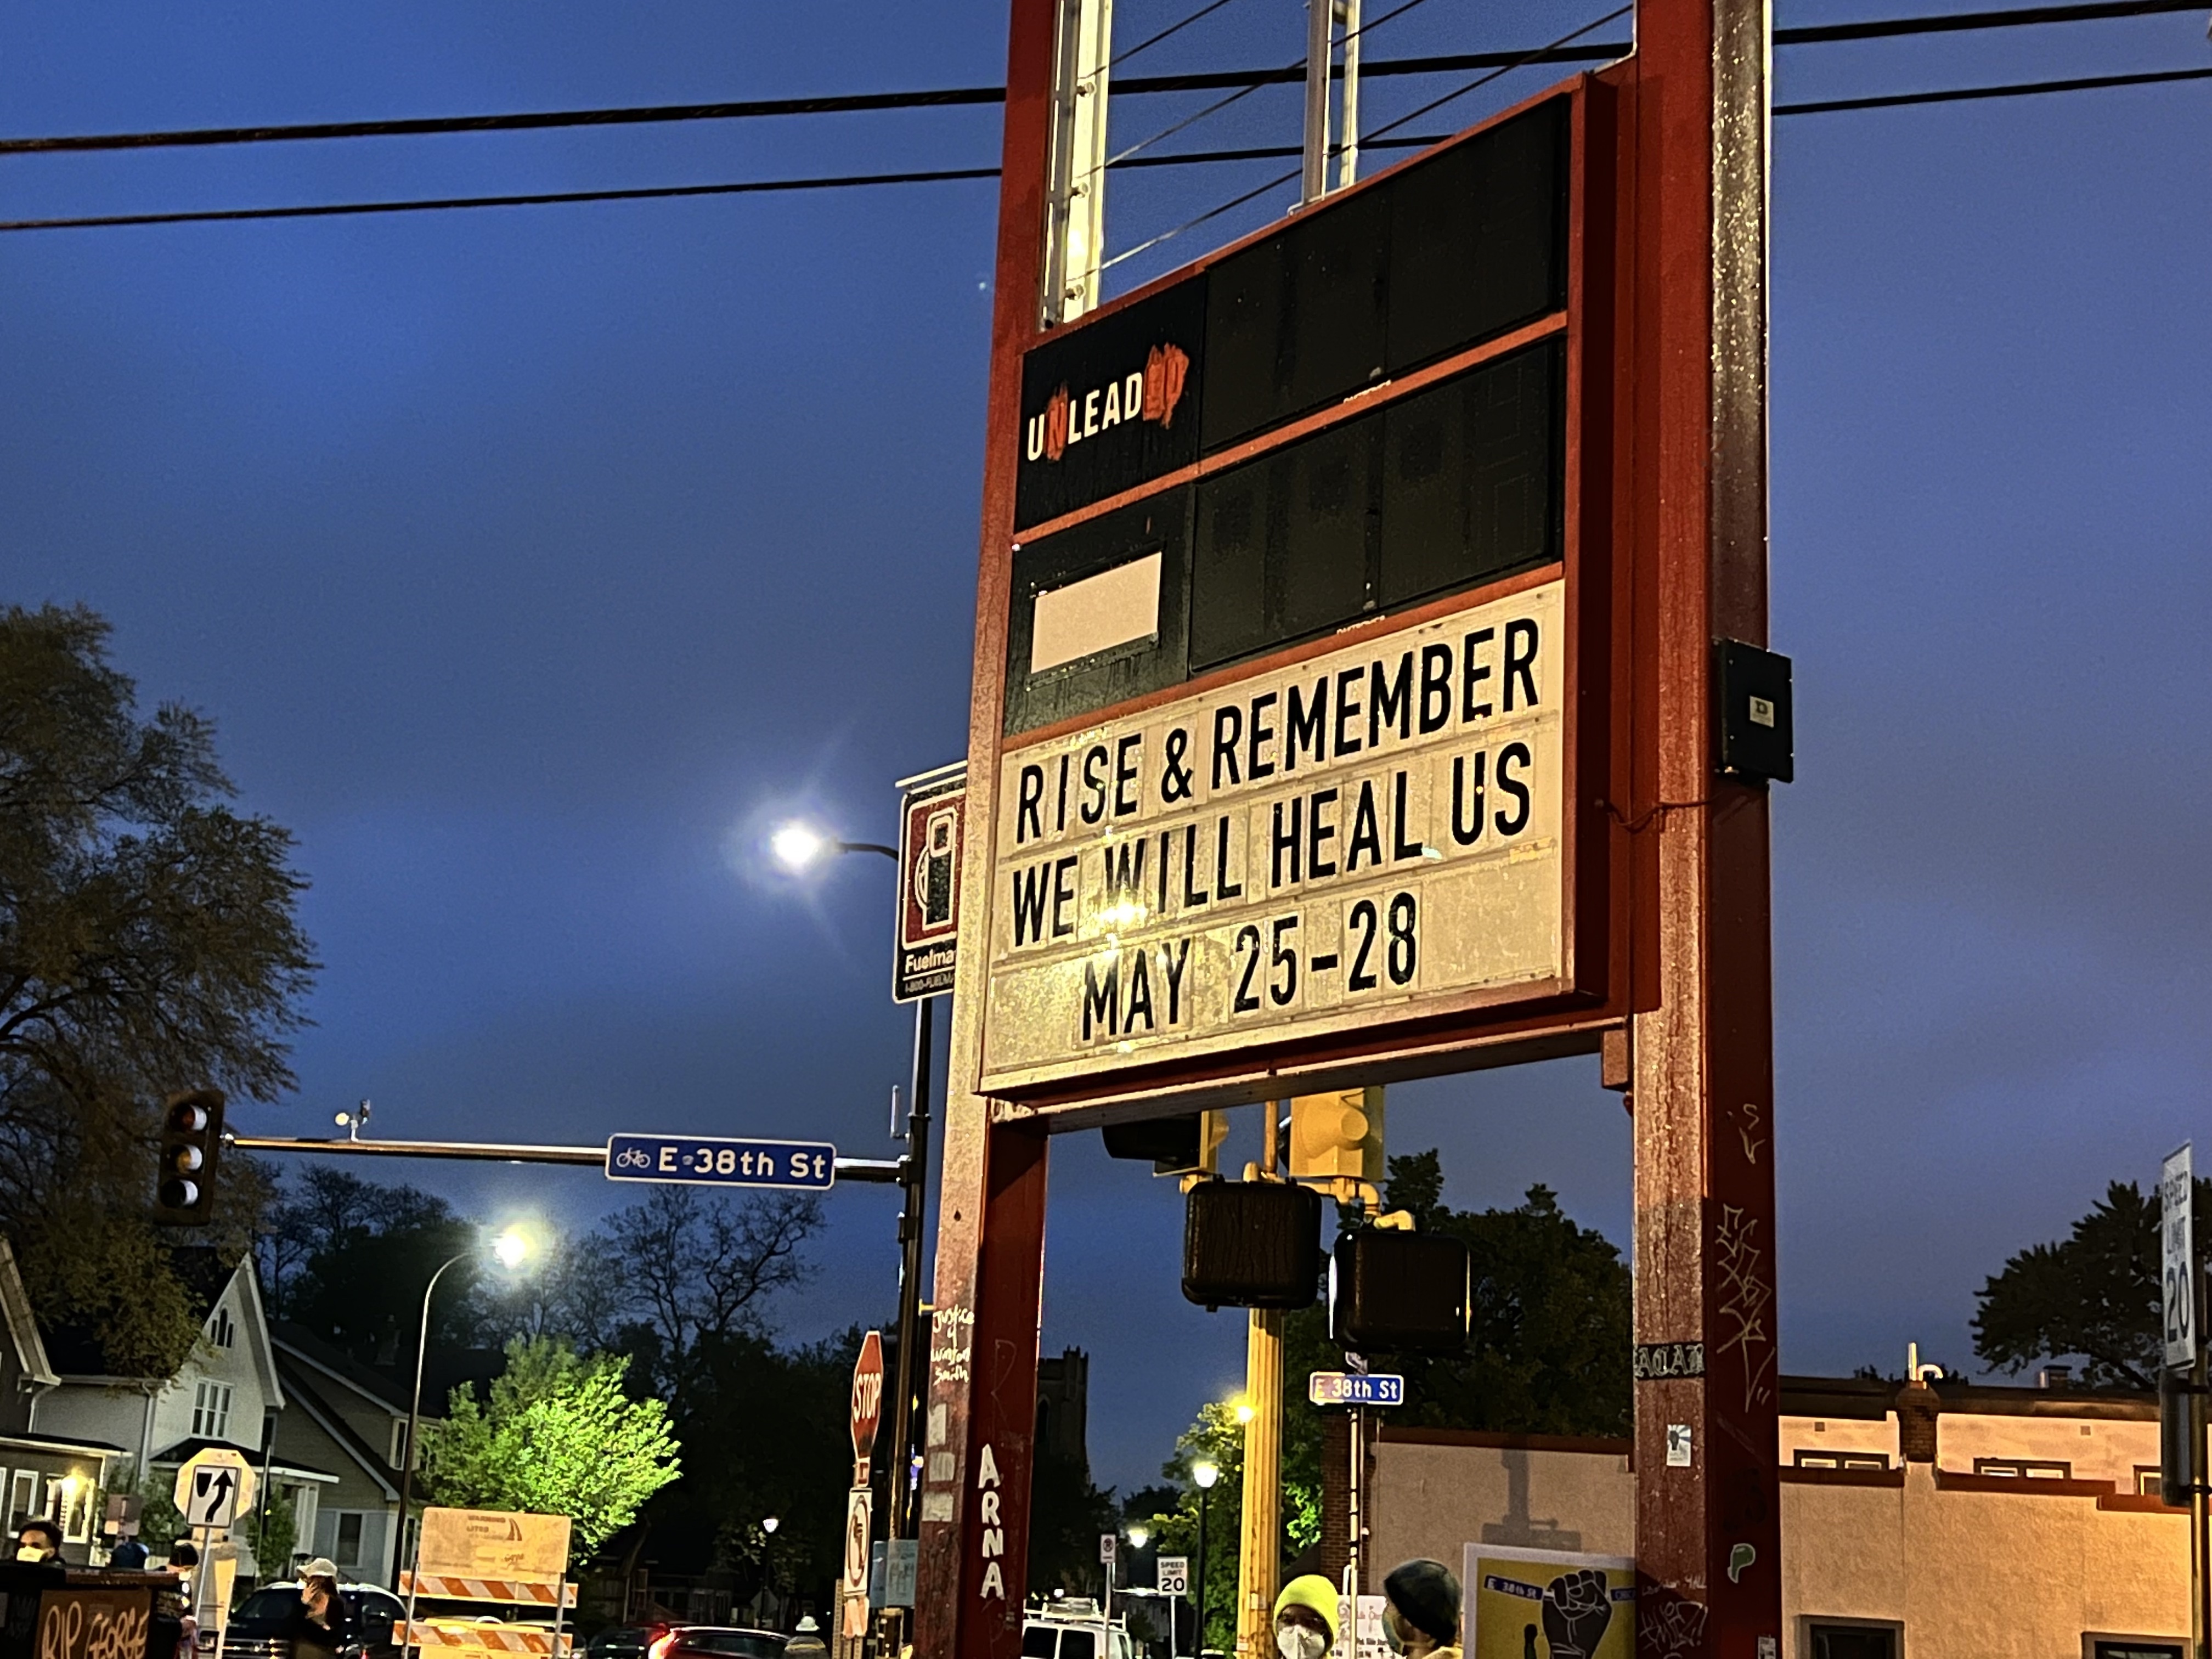 Sign: Rise and Remember: We Will Heal Us